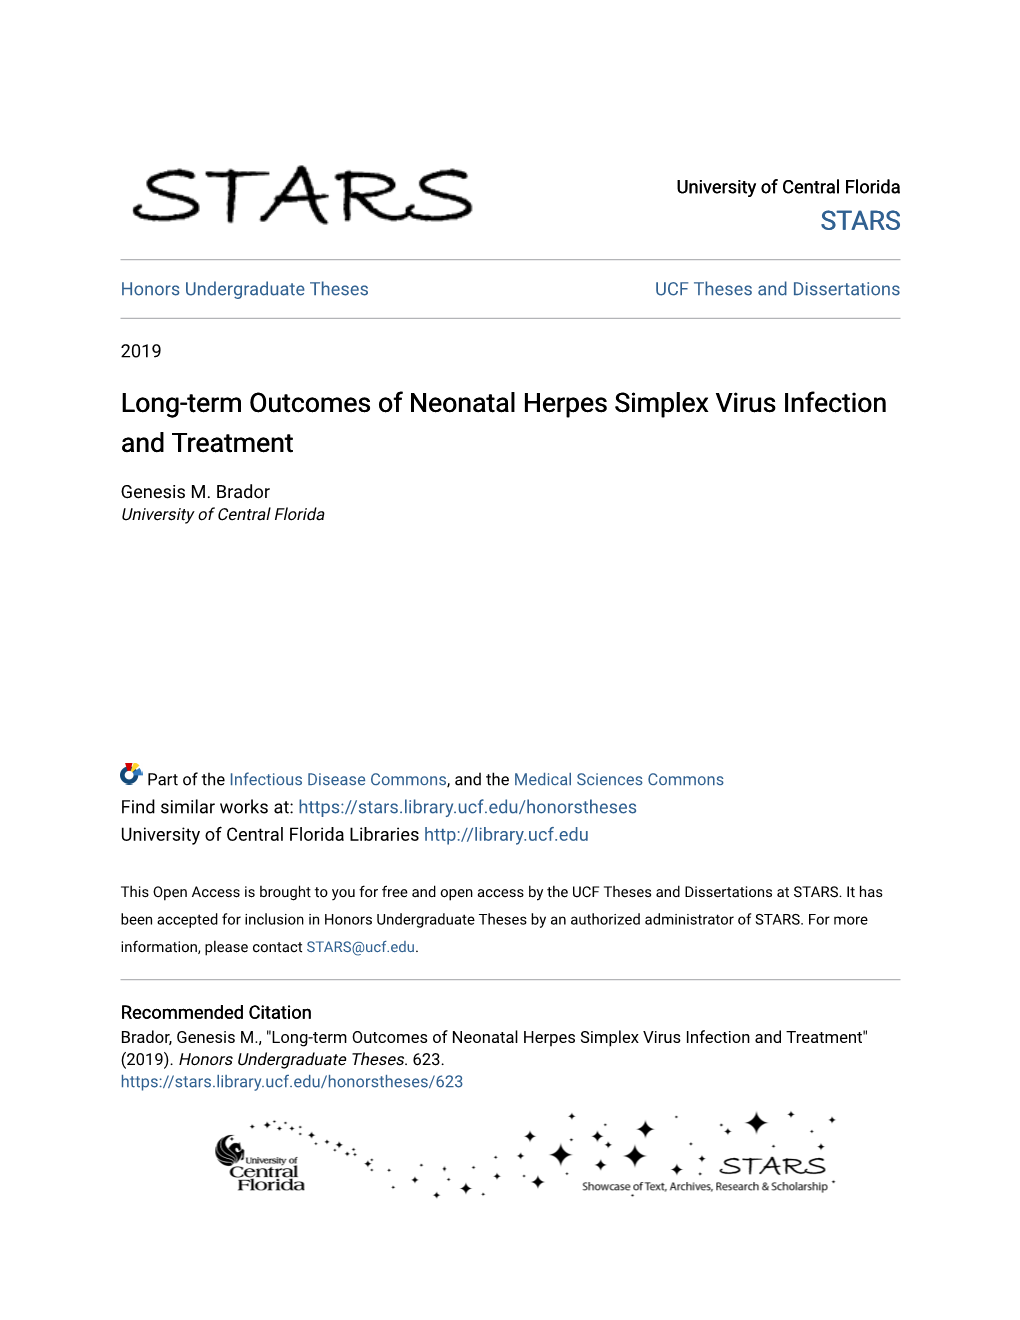 Long-Term Outcomes of Neonatal Herpes Simplex Virus Infection and Treatment